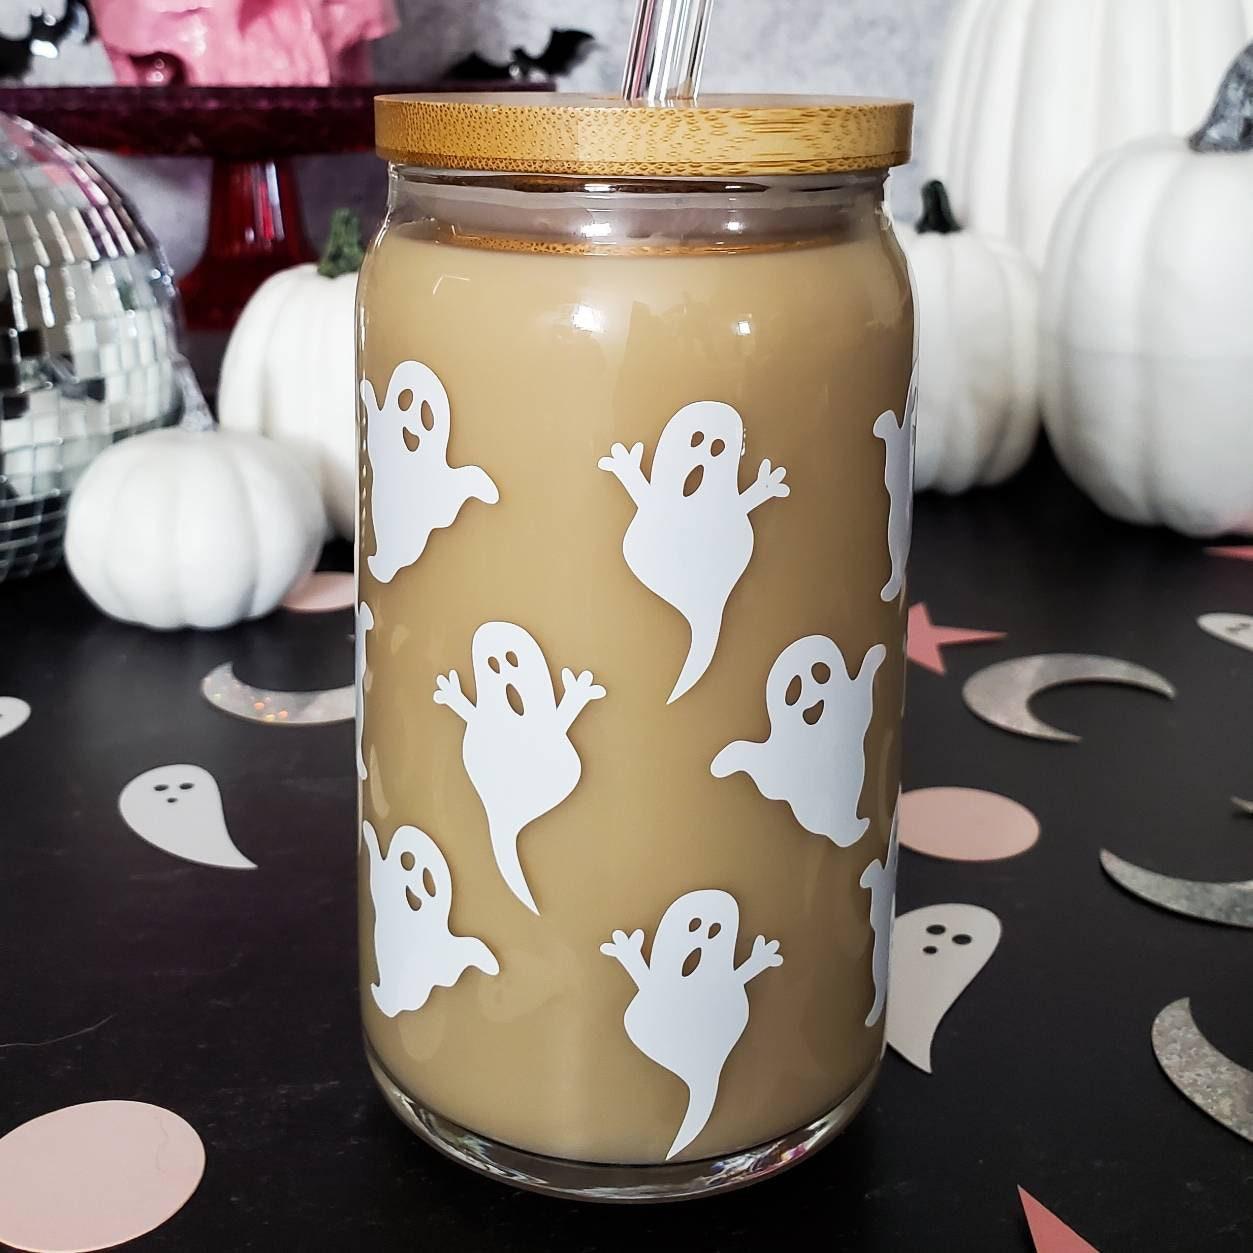 Cute Ghosts Iced Coffee Cup Salt and Sparkle